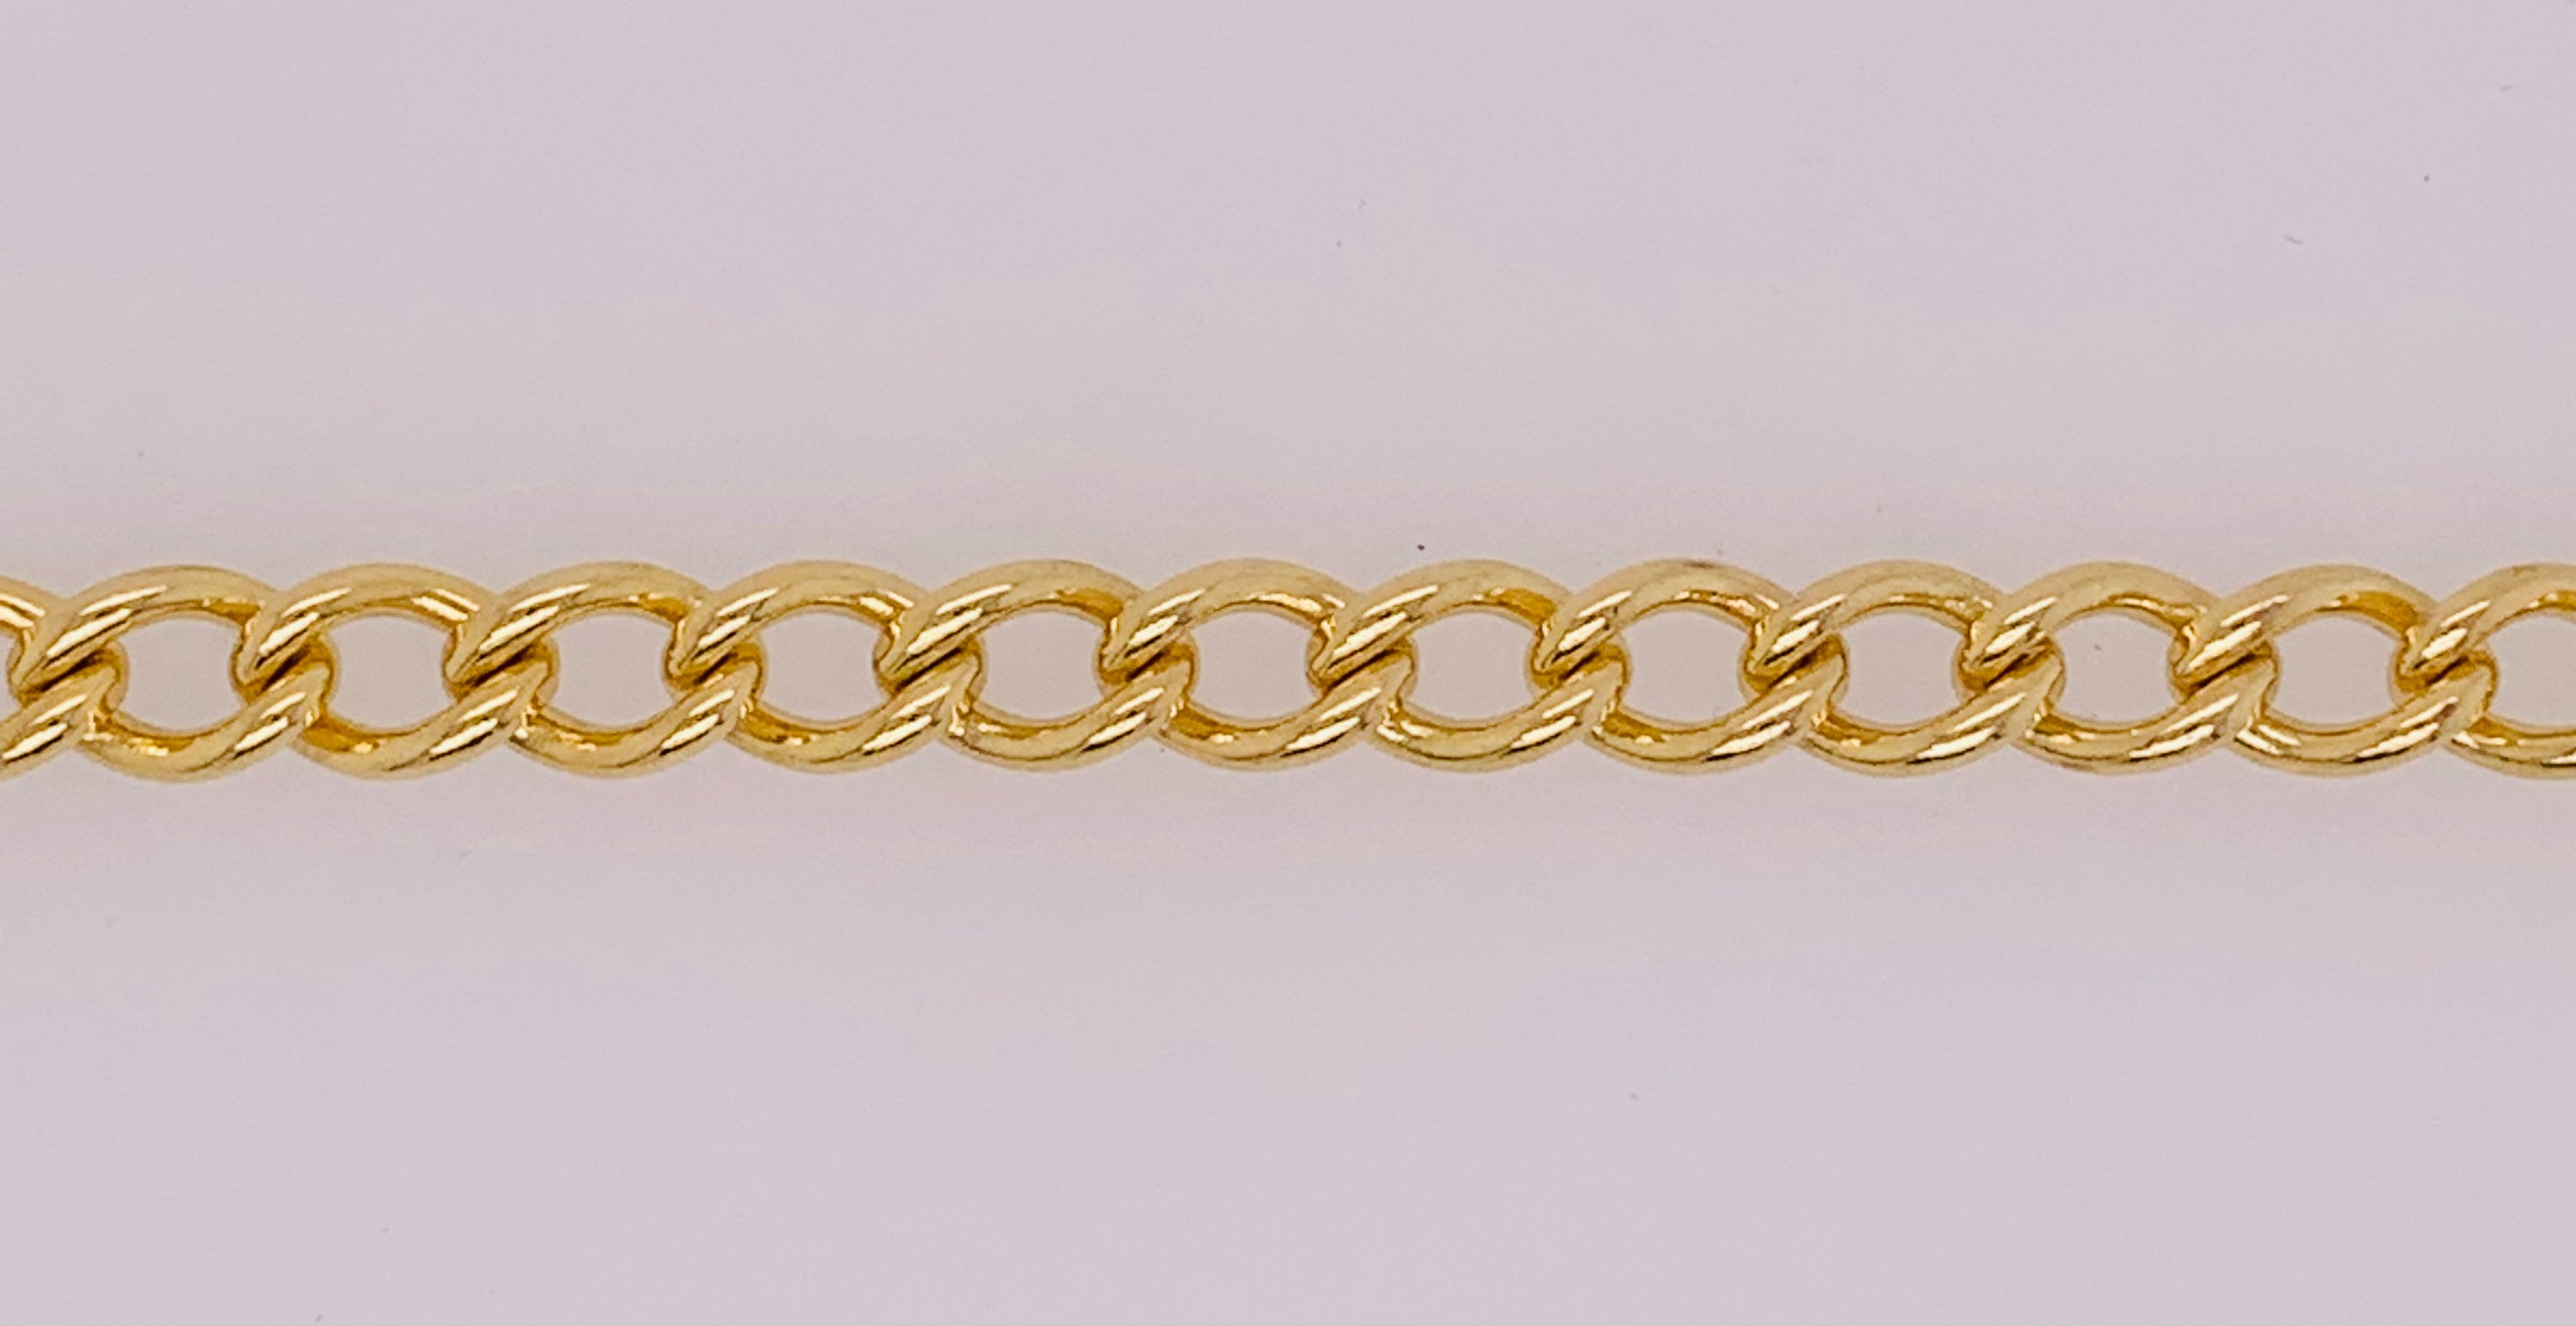 14K Gold Filled Curb Chain